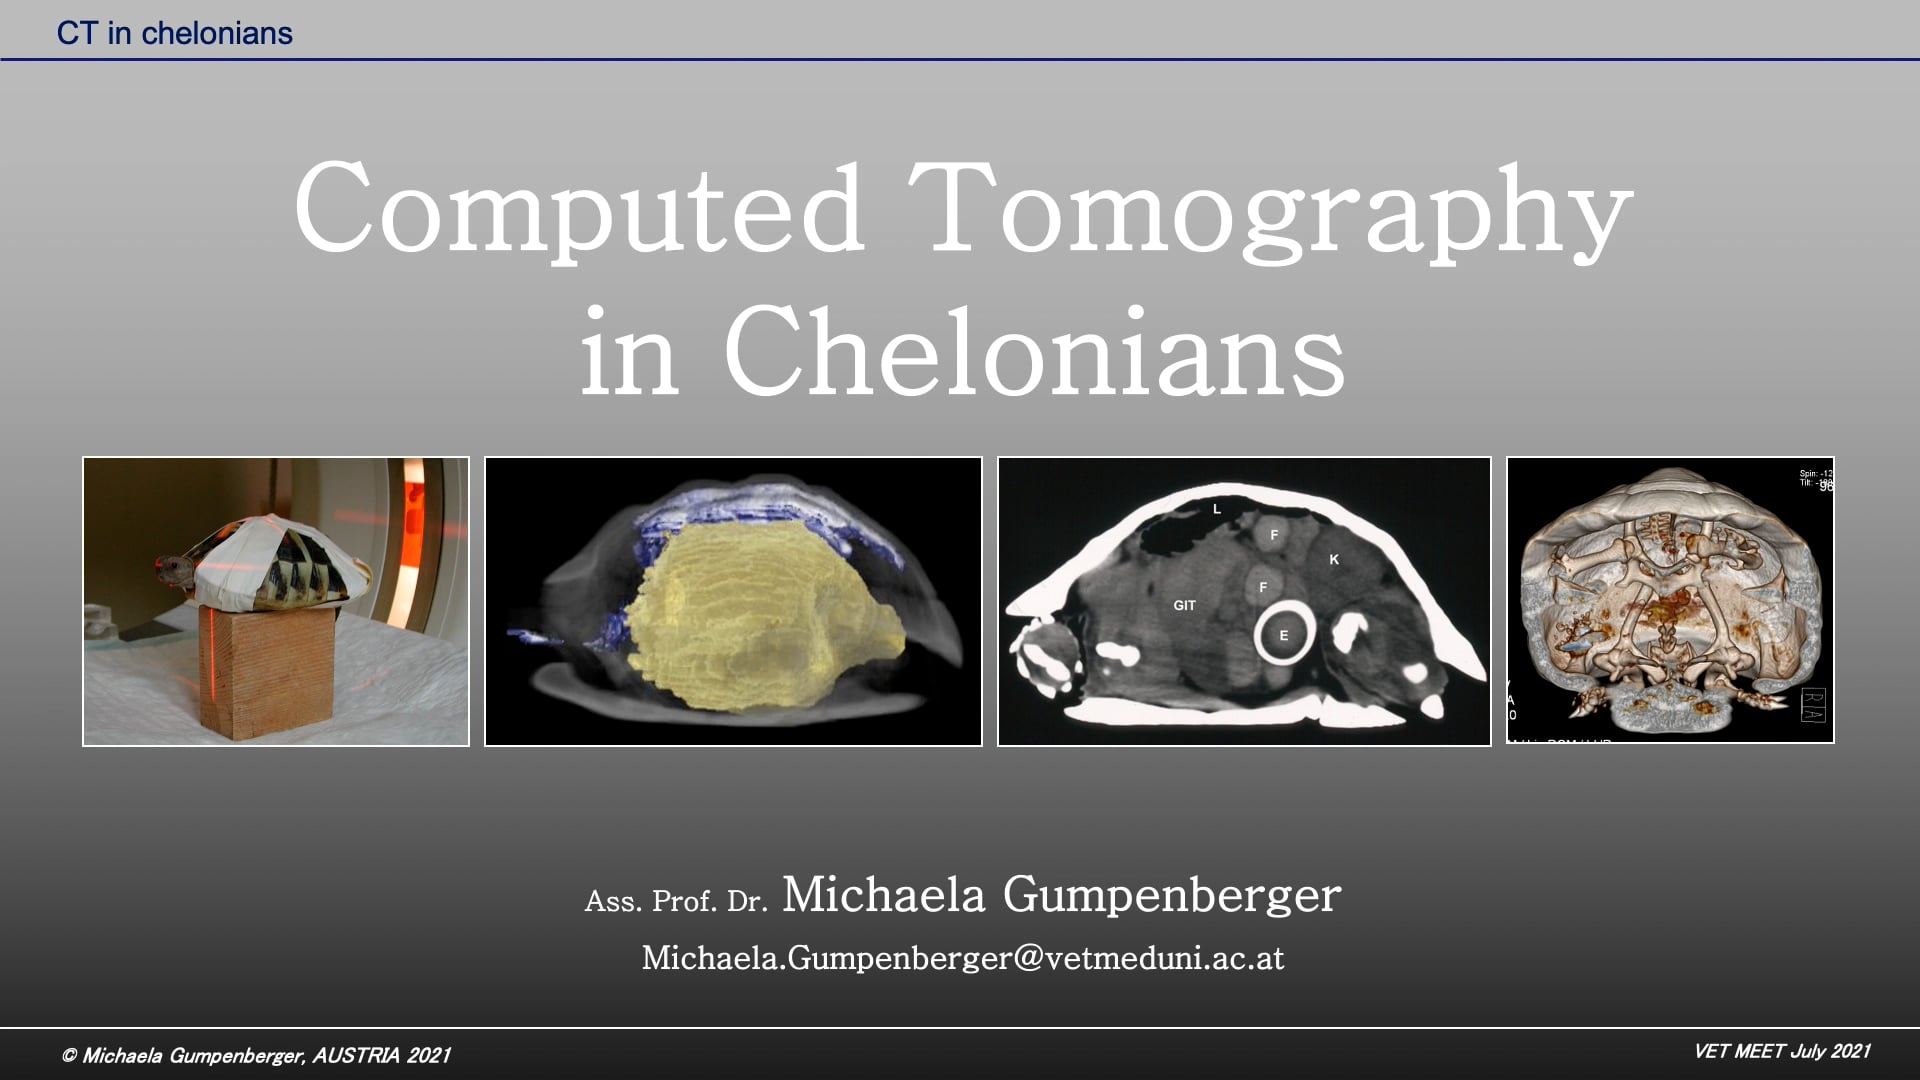 Comuted Tomography in Chelonians